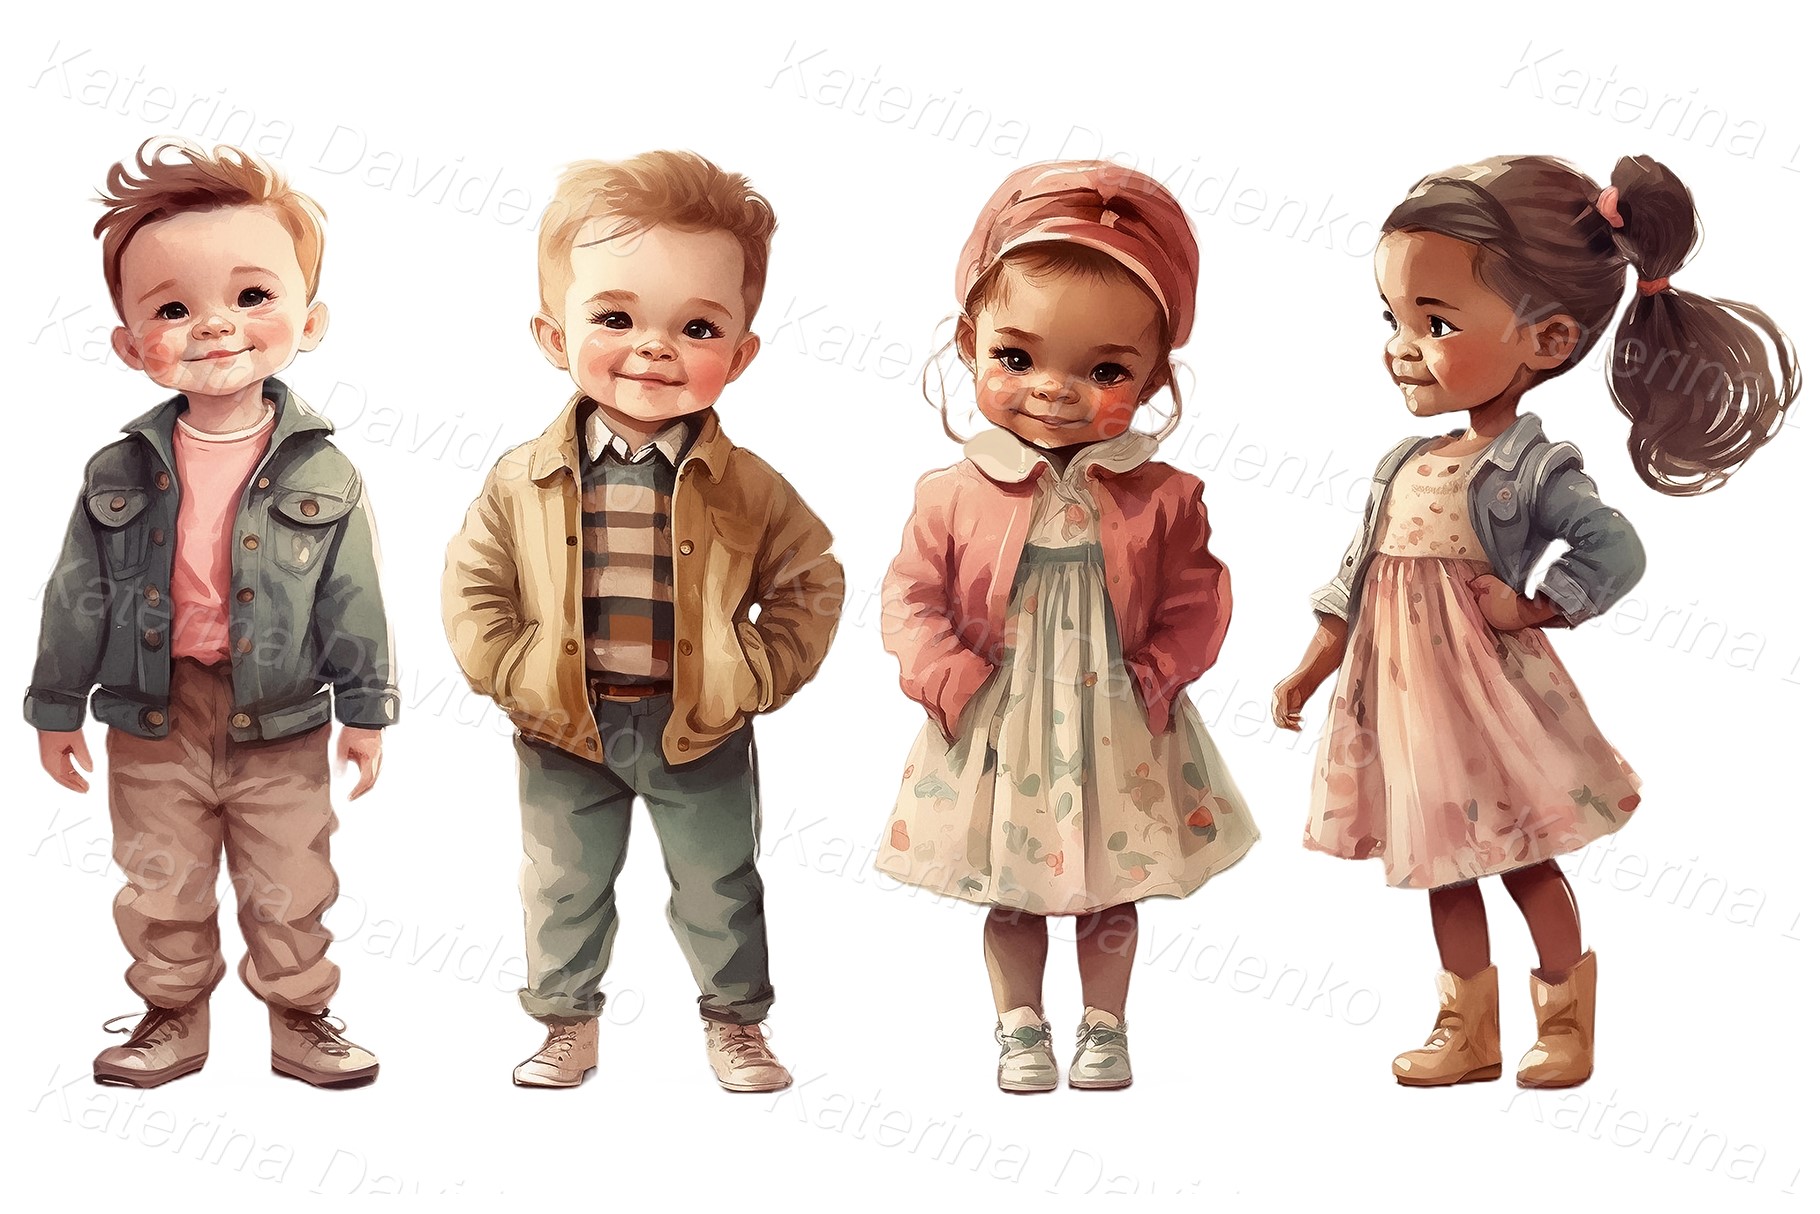 Cute cartoon children standing in a row in different poses, little kids in casual clothes